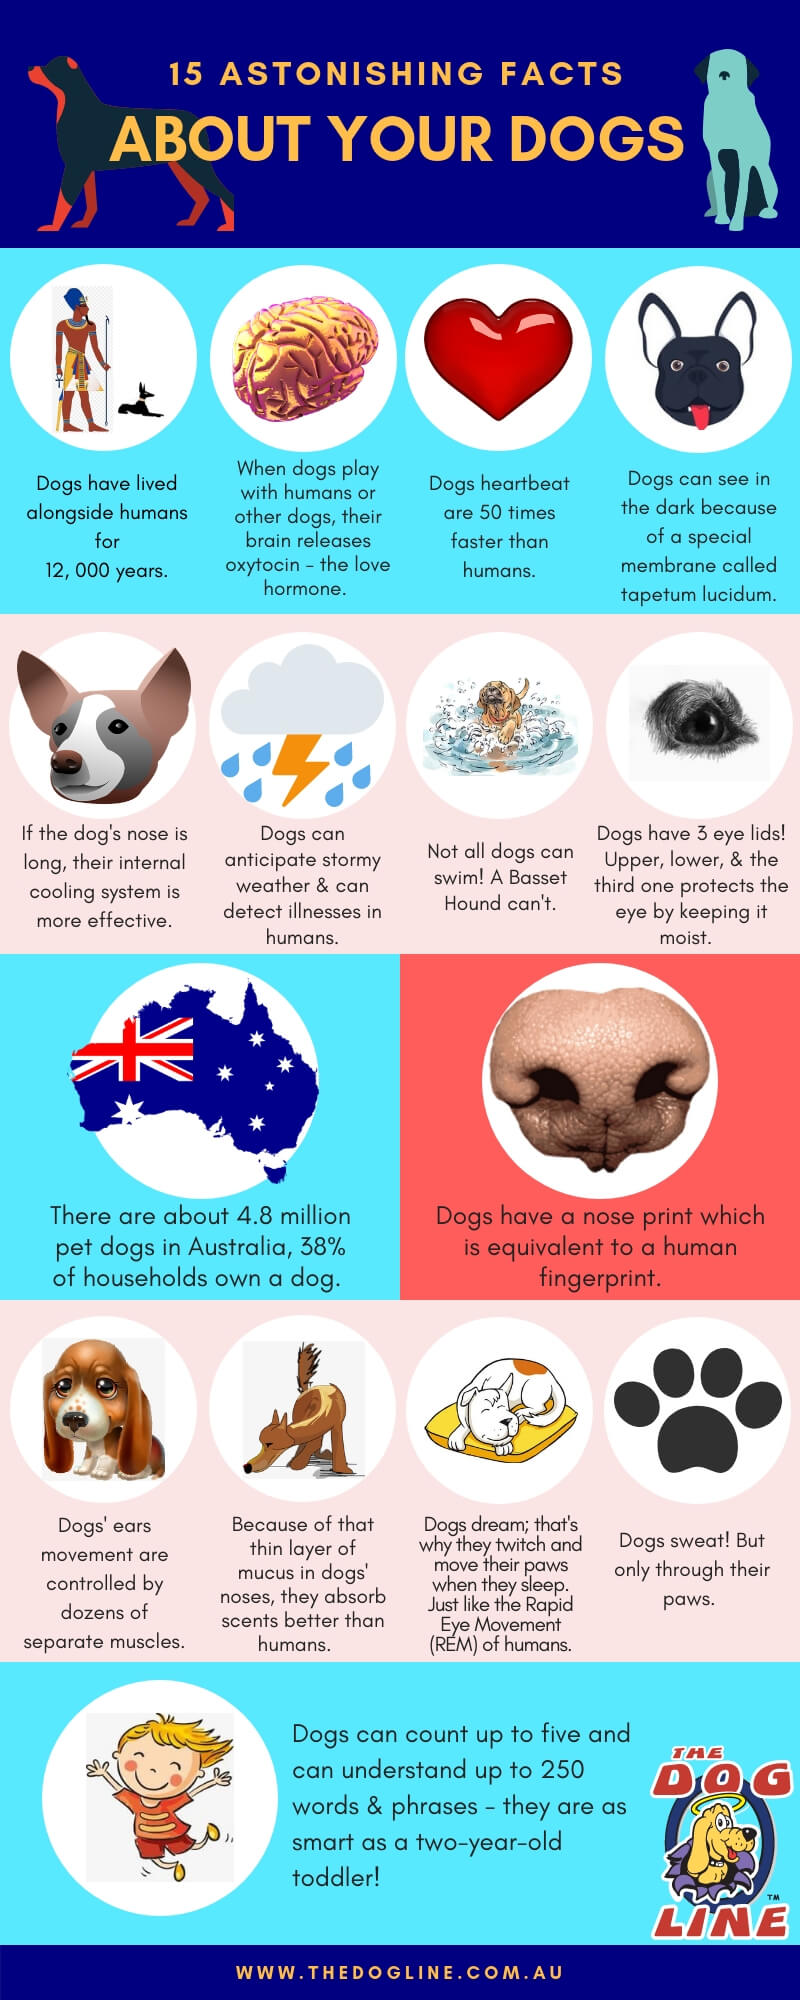 15 amazing facts about dogs